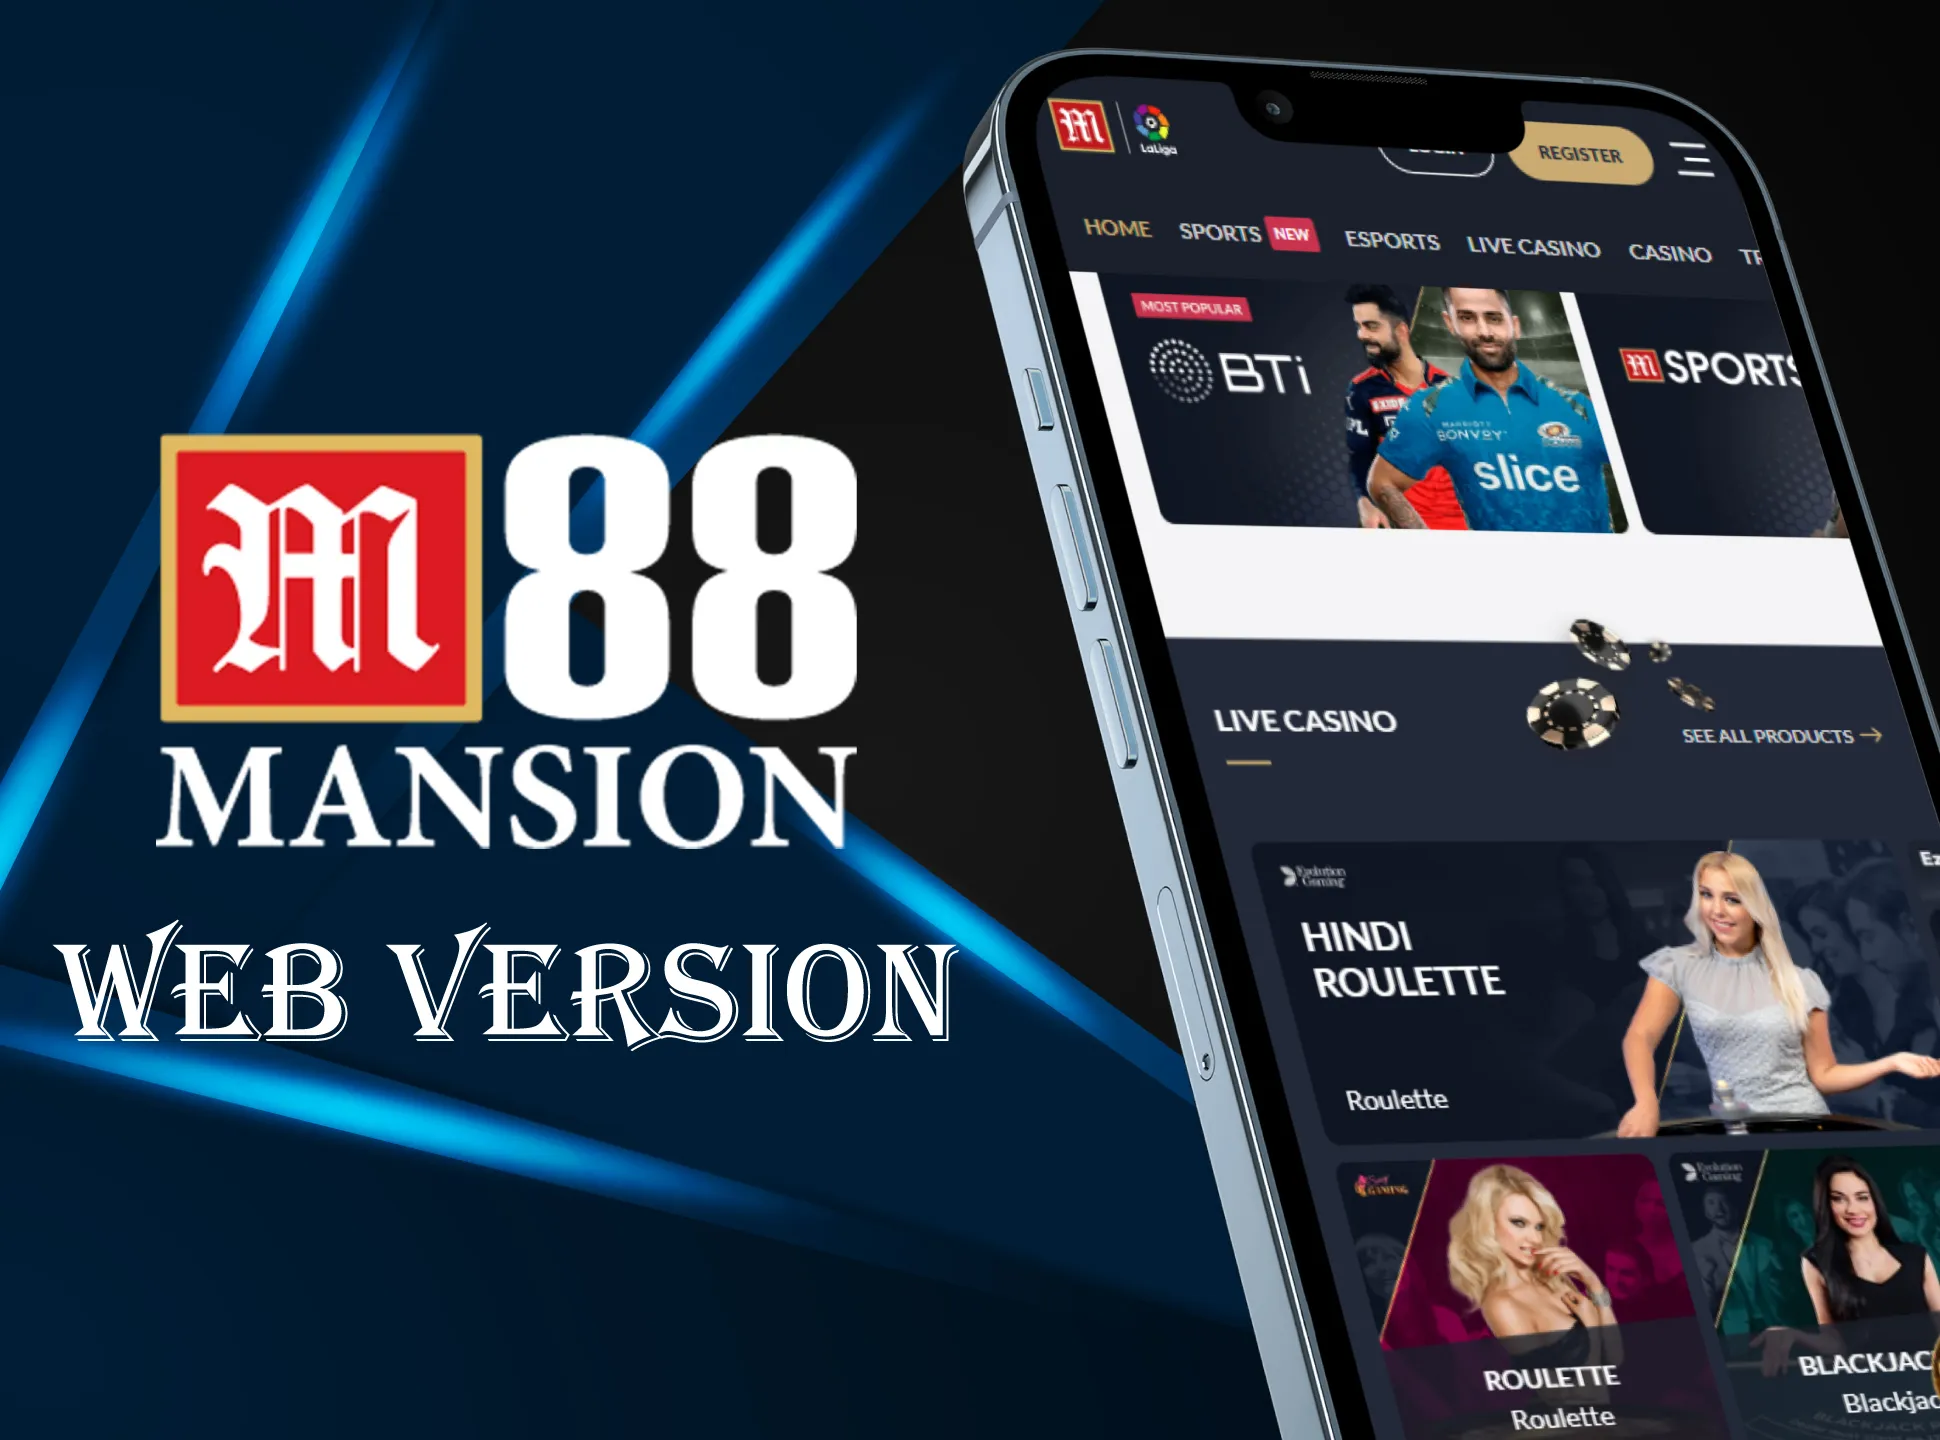 You can use M88 web version on any device.